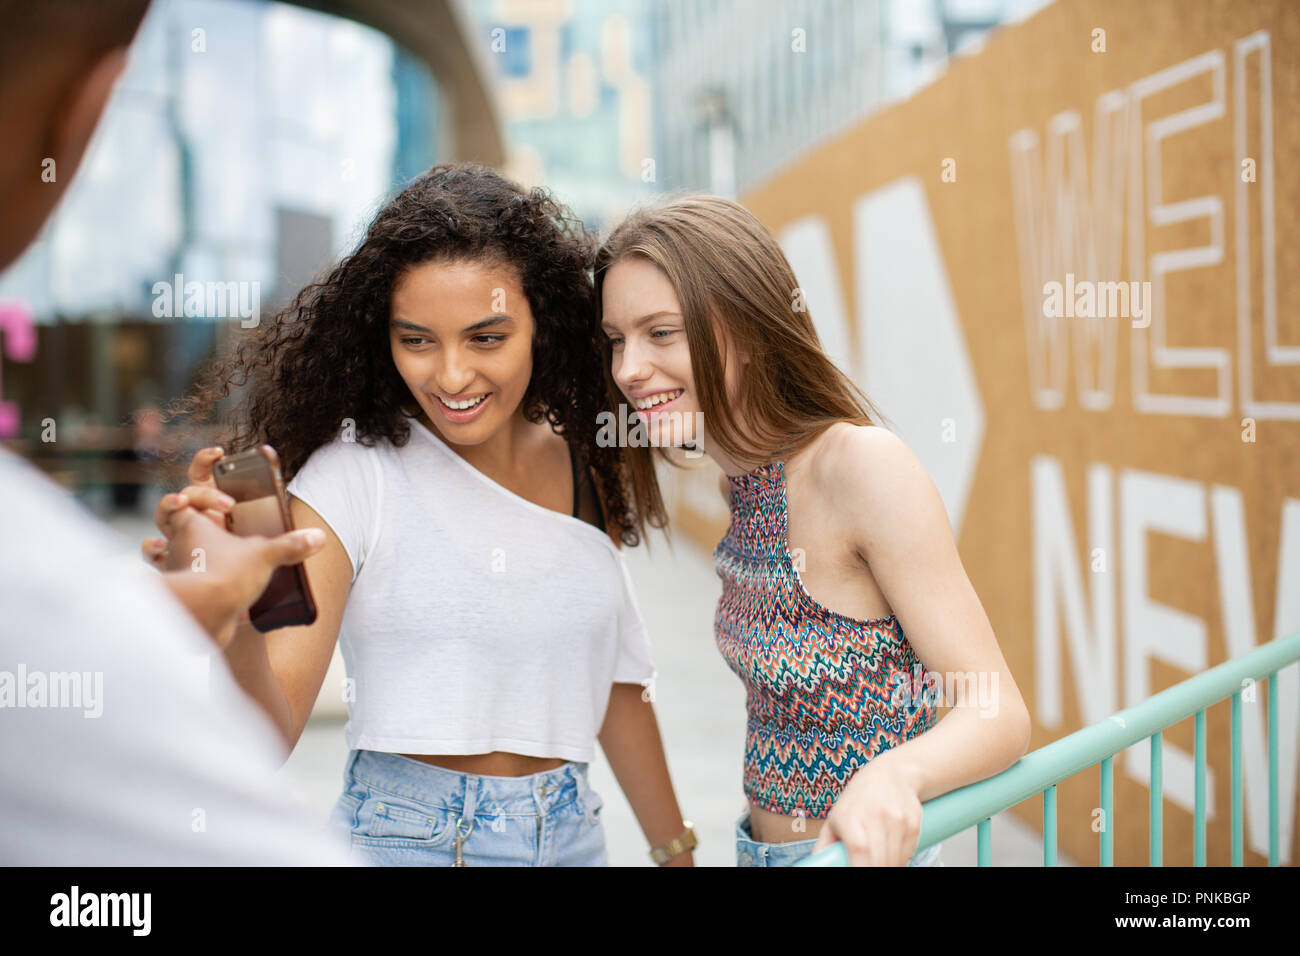 Teenagers socialising outdoors in city looking at smartphone Stock Photo